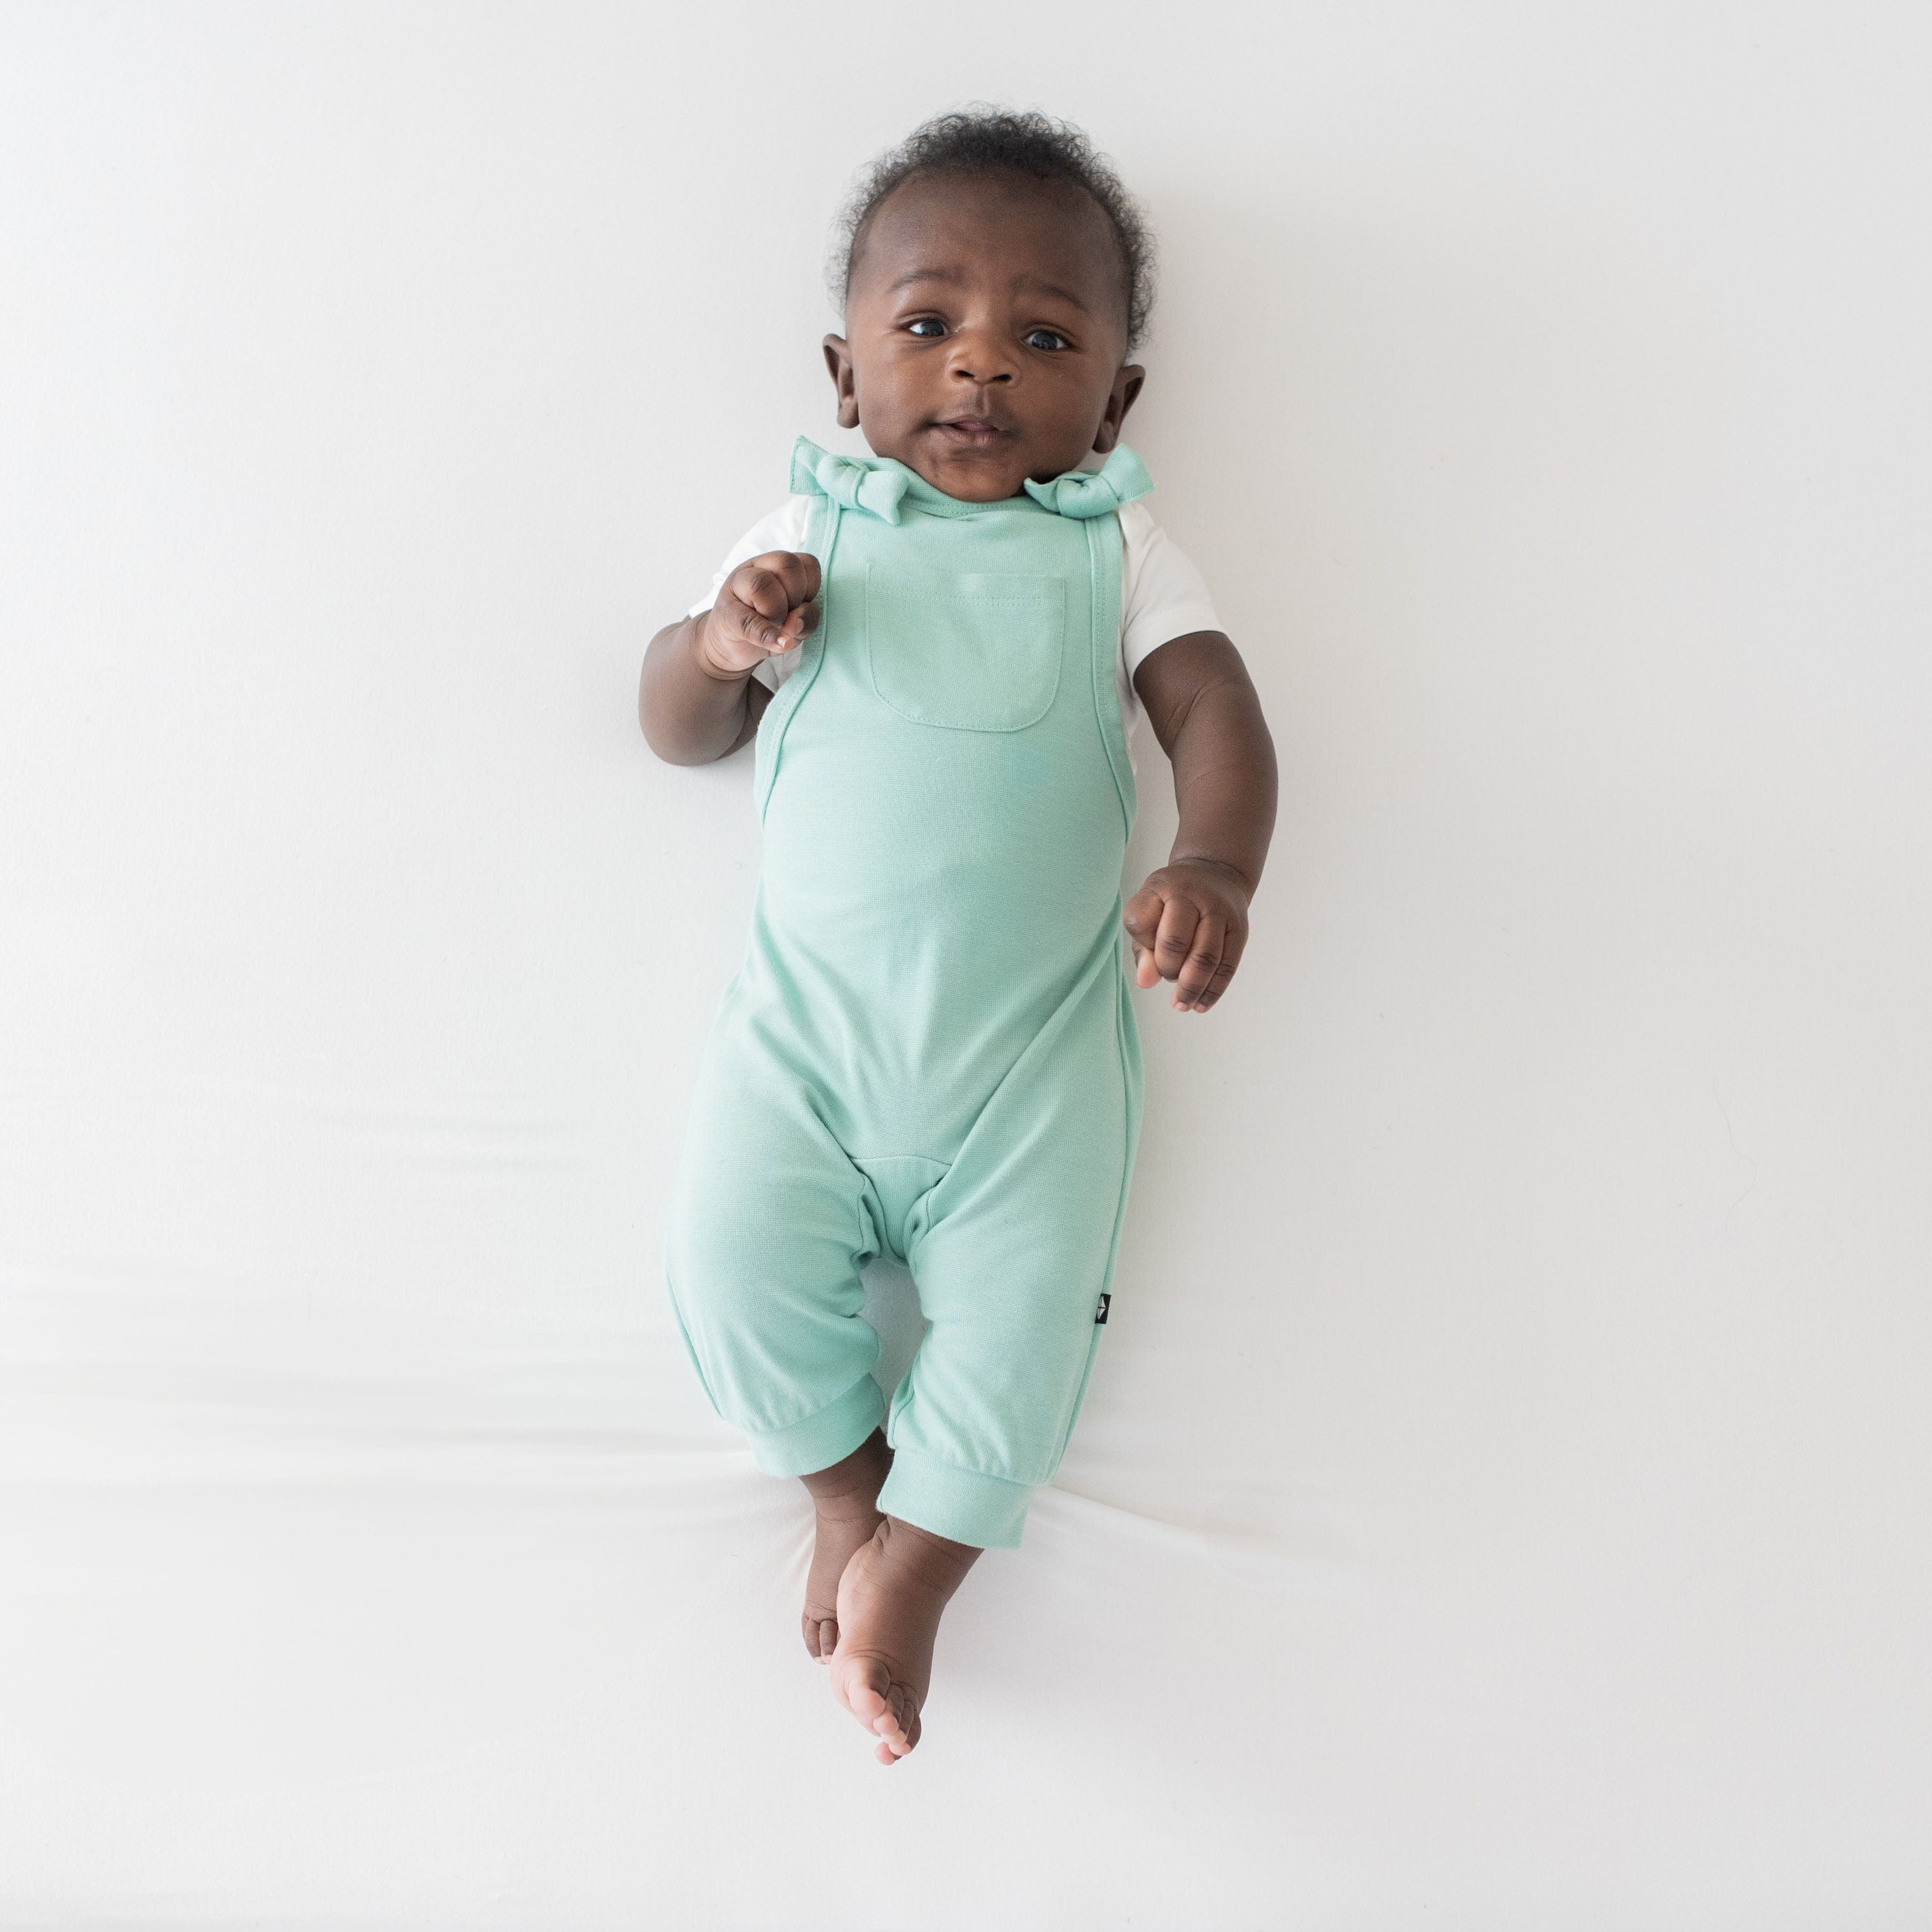 Kyte Baby Baby Overall Bamboo Jersey Overall in Wasabi